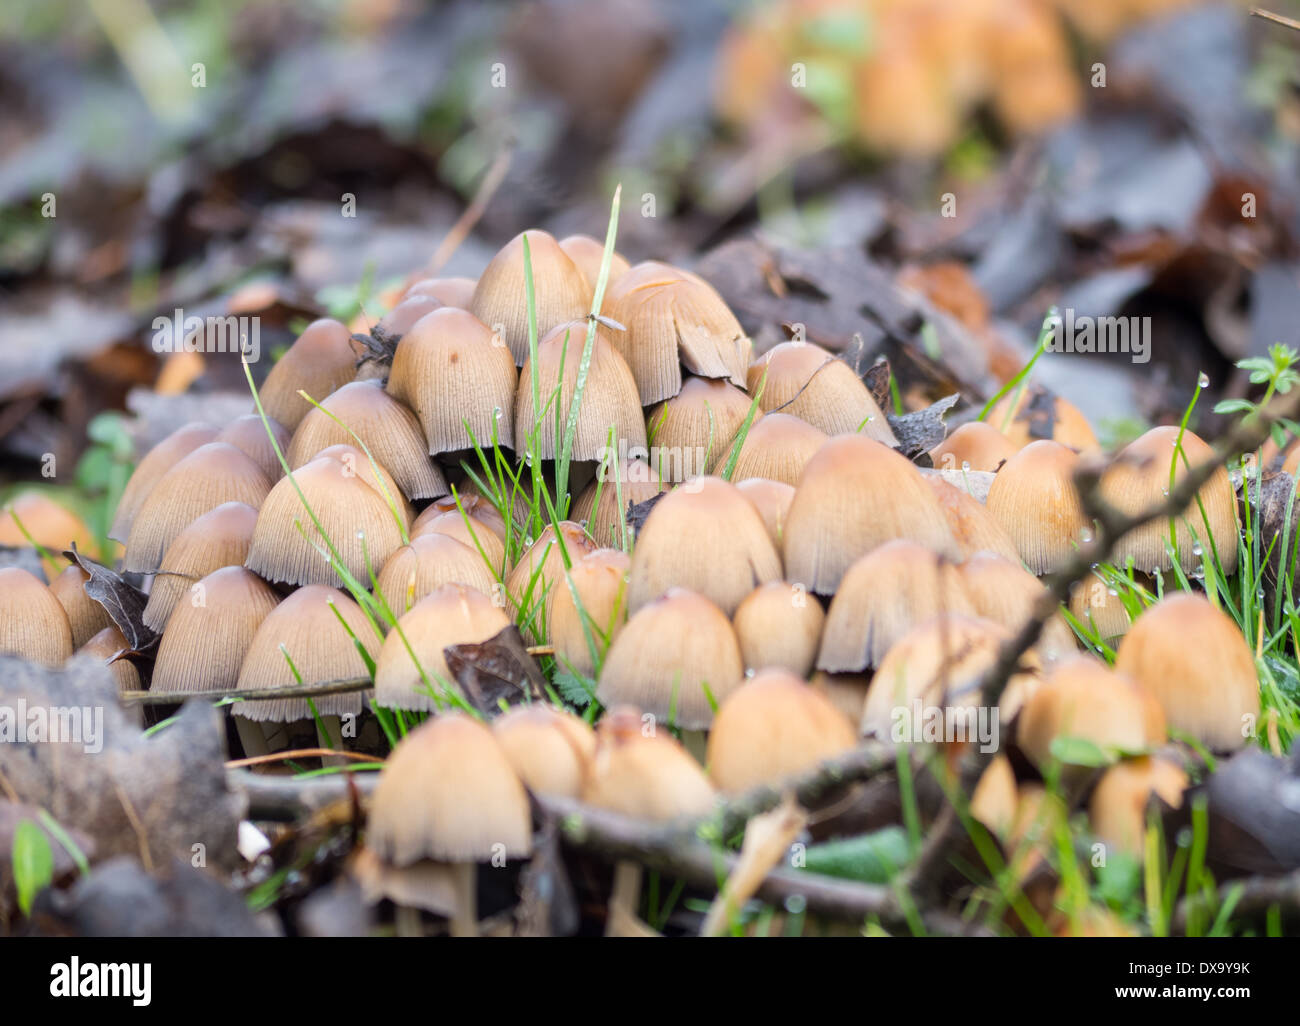 Close-up of a group of Coprinellus micaceus mushroom Stock Photo